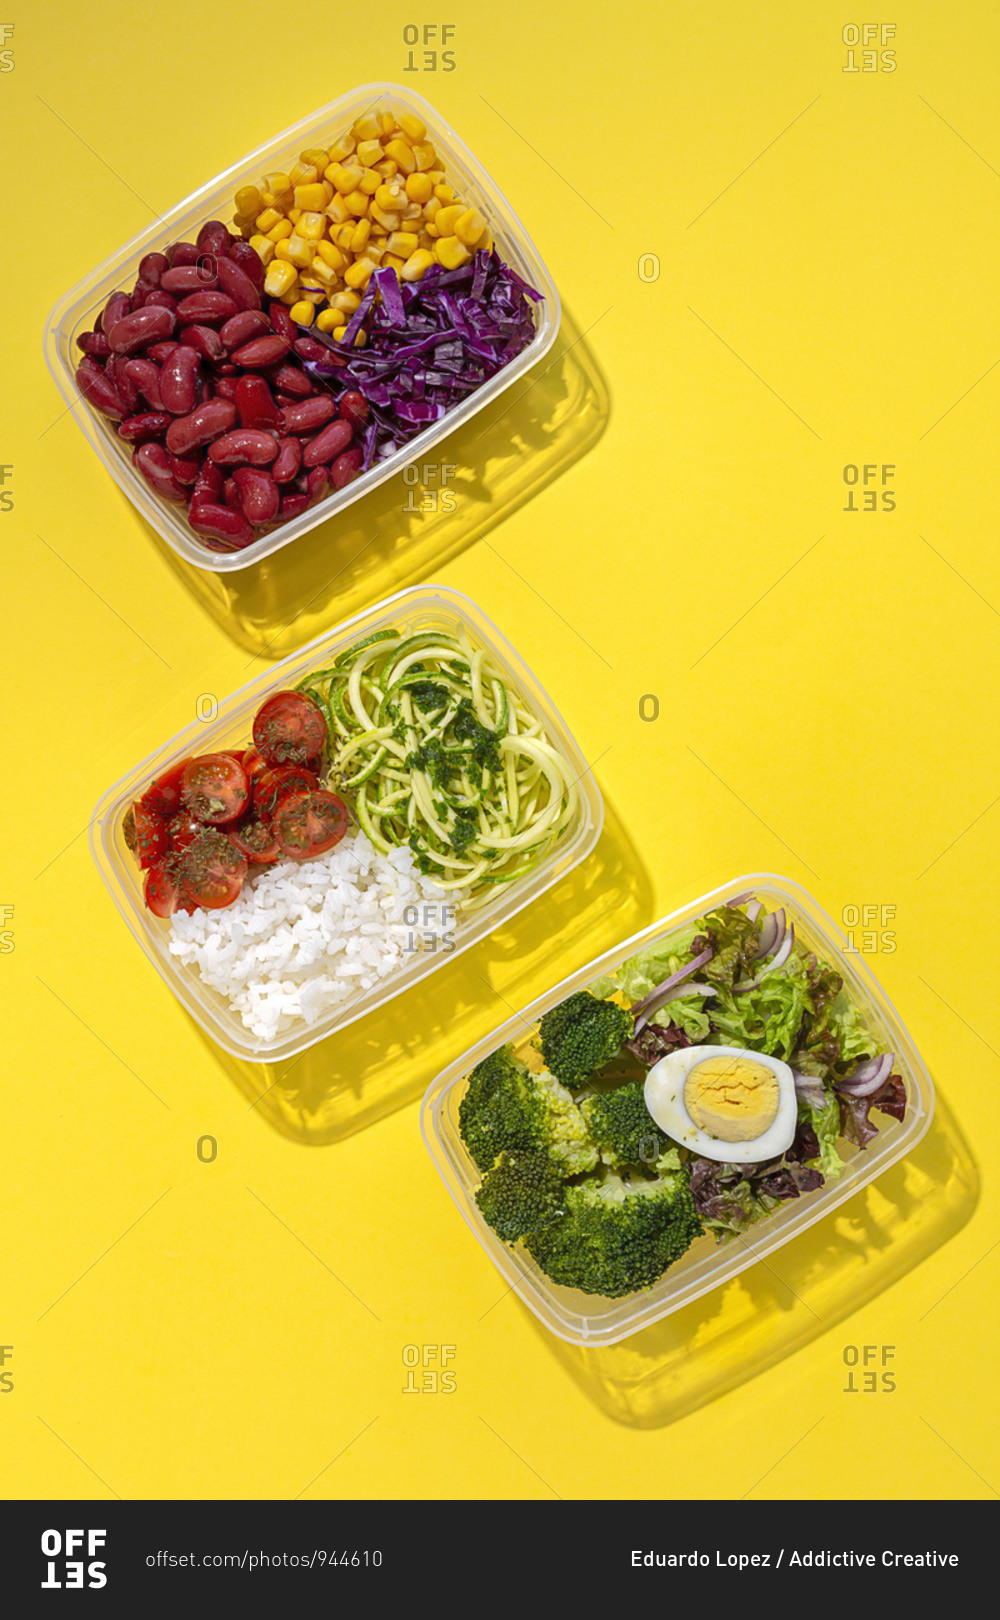 Homemade vegan food in lunch boxes with healthy vegetable
fresh from above. Vegan food concept. Healthy food. Flat lay. Top
view stock photo - OFFSET